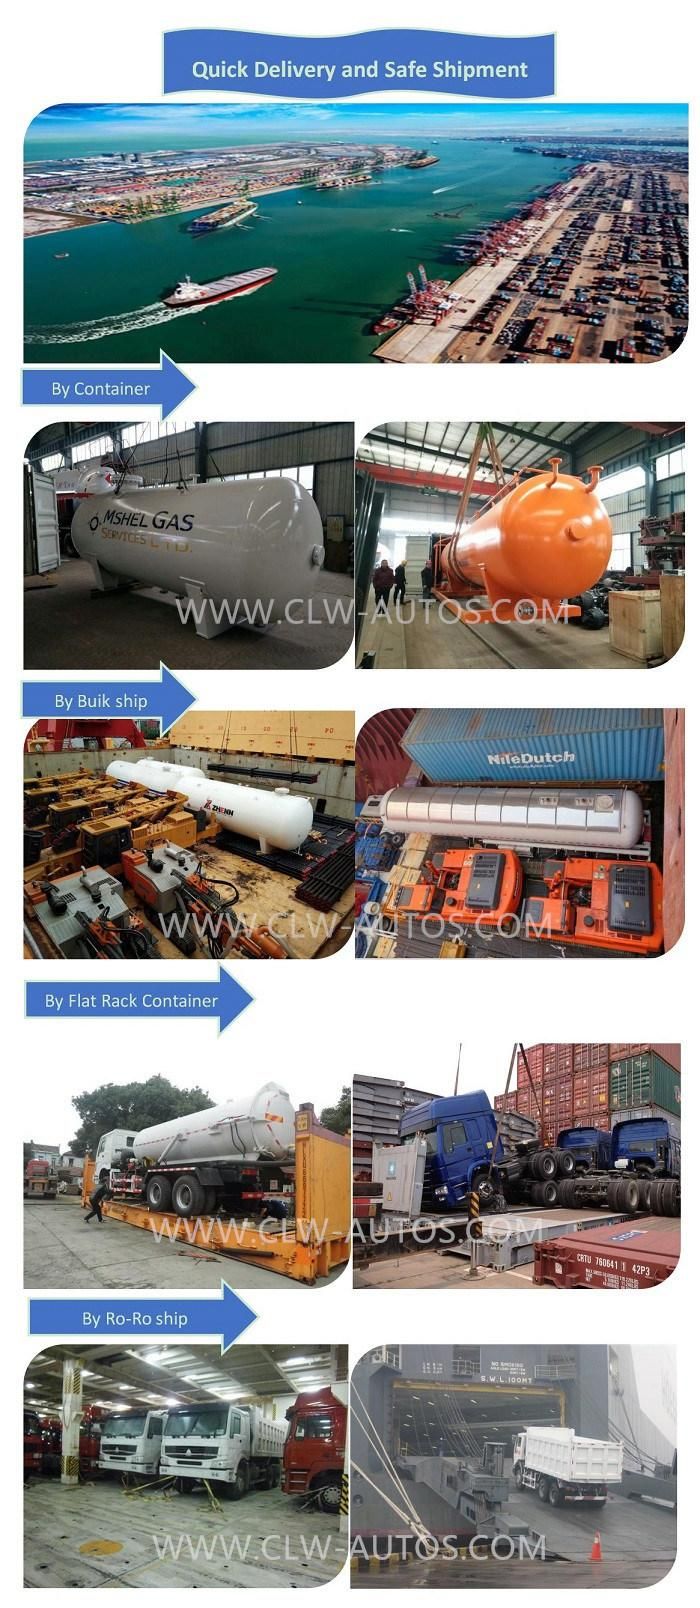 Dongfeng 6cbm Compressed Waste Garbage Compactor Waste Treatment Truck